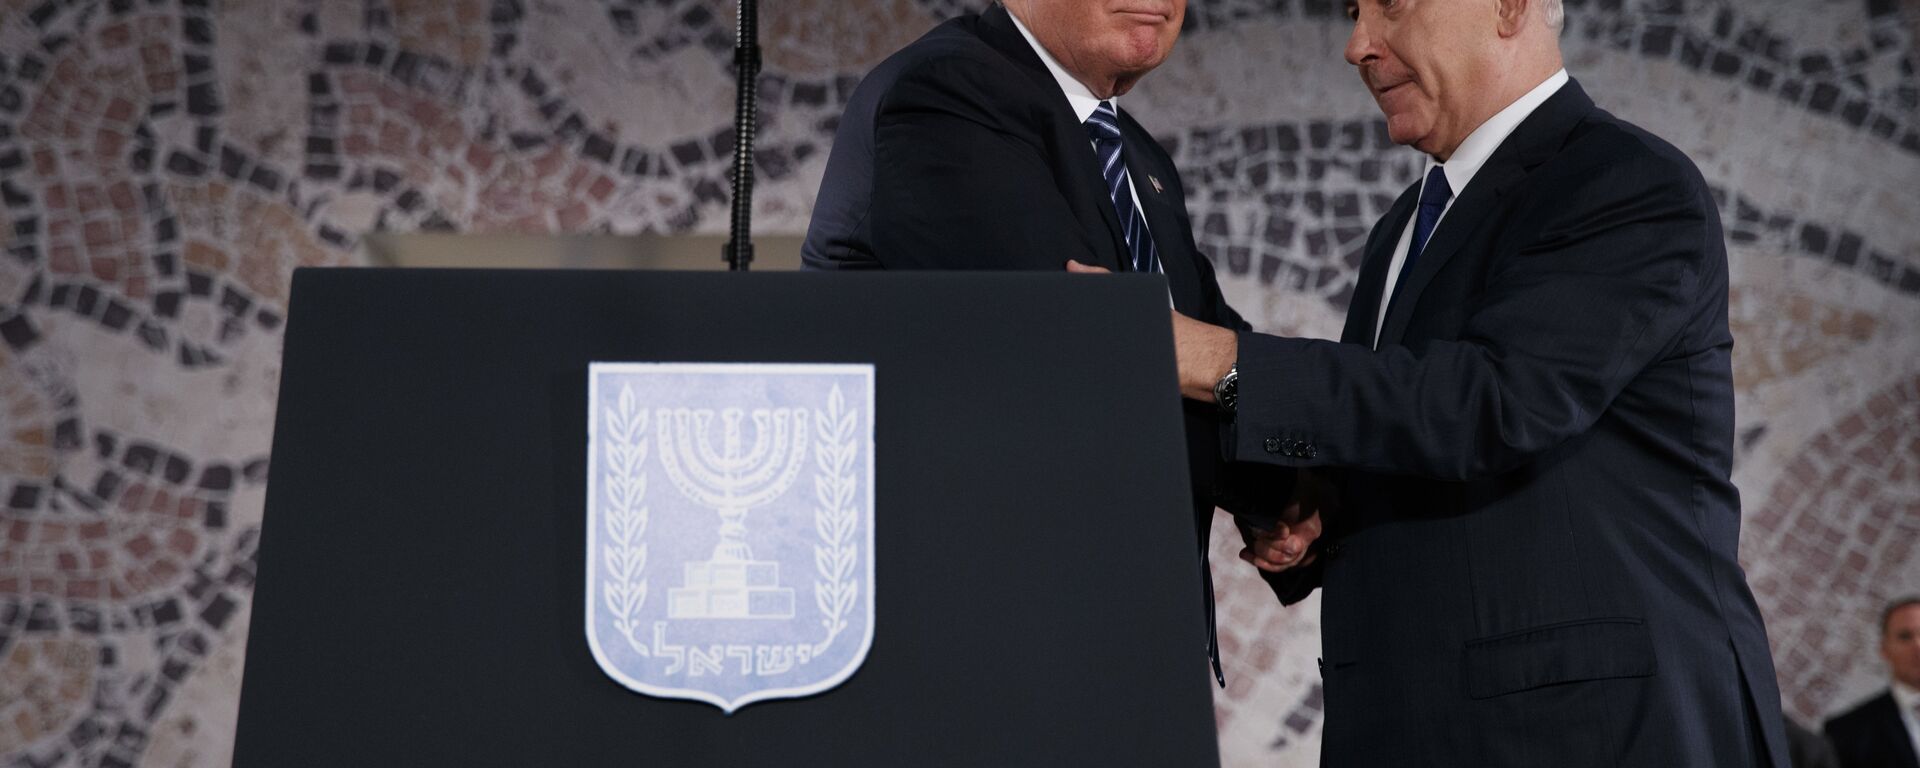 President Donald Trump shakes hands with Israeli Prime Minister Benjamin Netanyahu before delivering a speech at the Israel Museum, Tuesday, May 23, 2017, in Jerusalem - Sputnik International, 1920, 10.12.2021